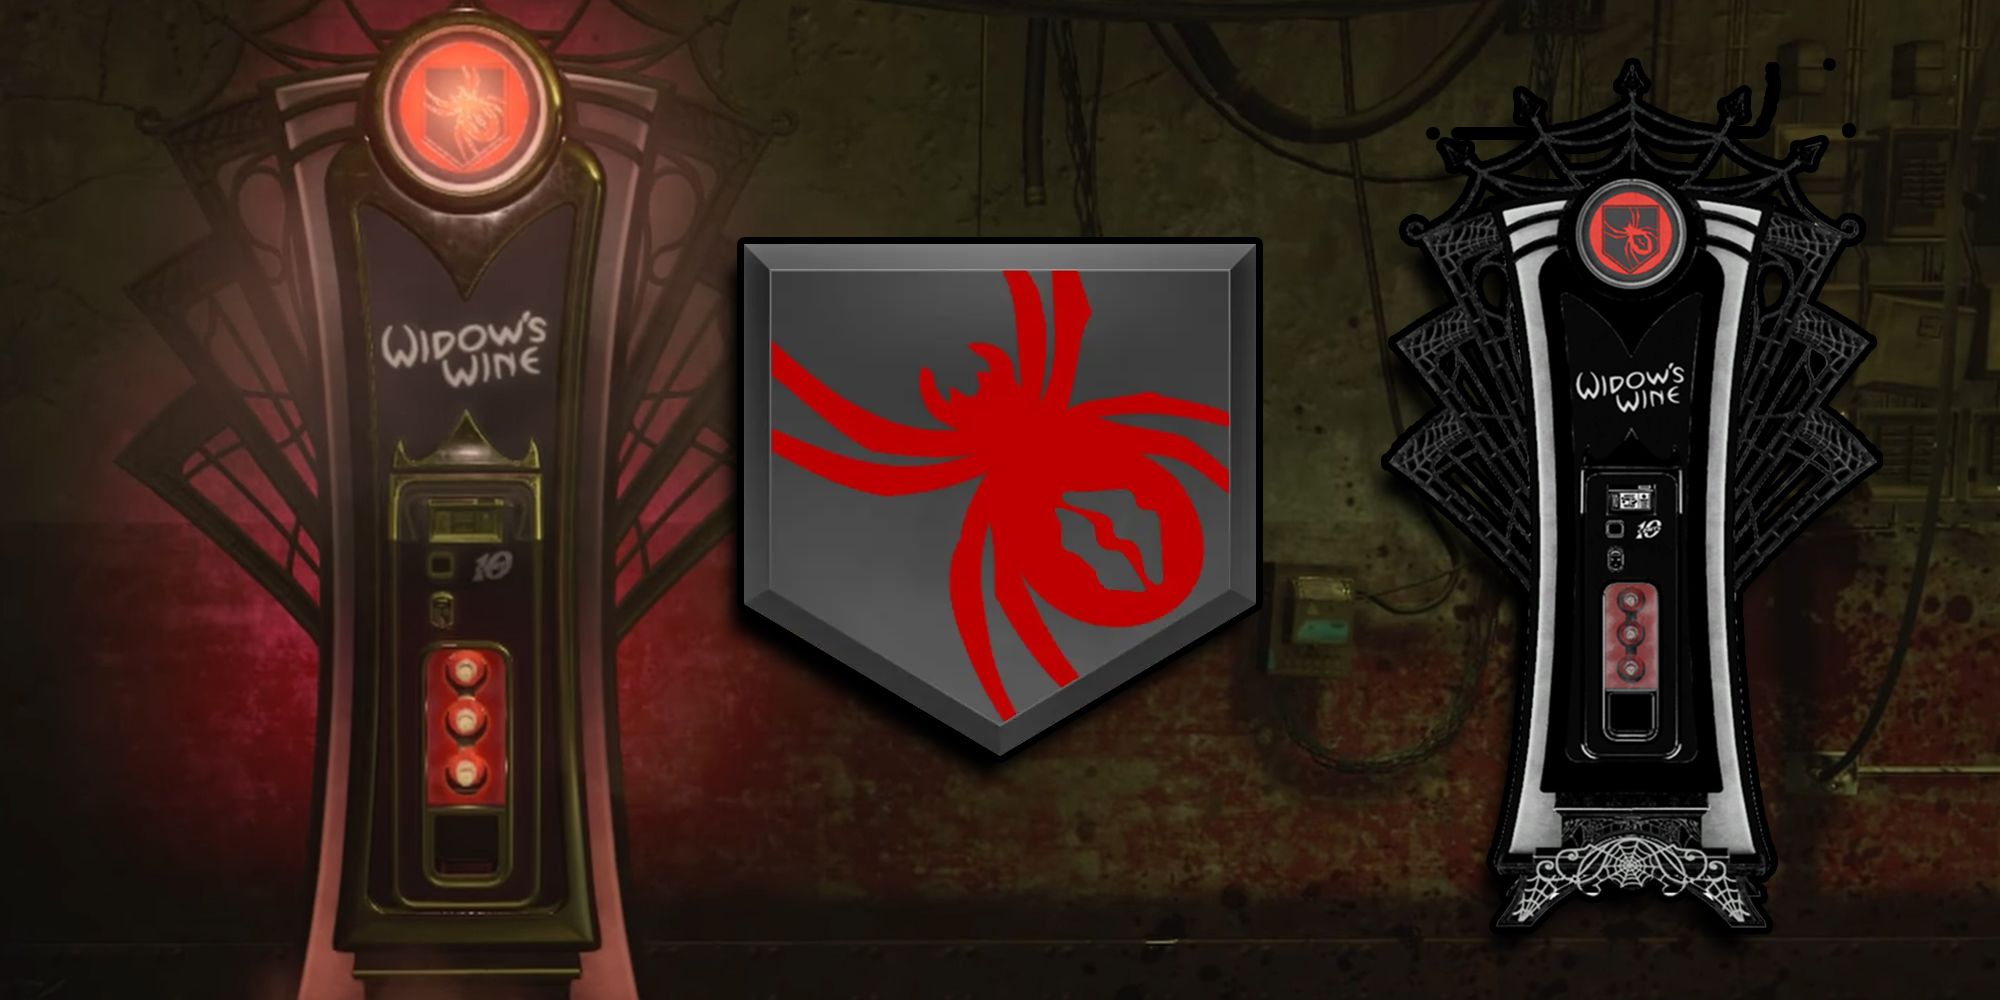 Call of Duty - Widow's Wine Perk Machine With PNG Of Machine And Logo On Top